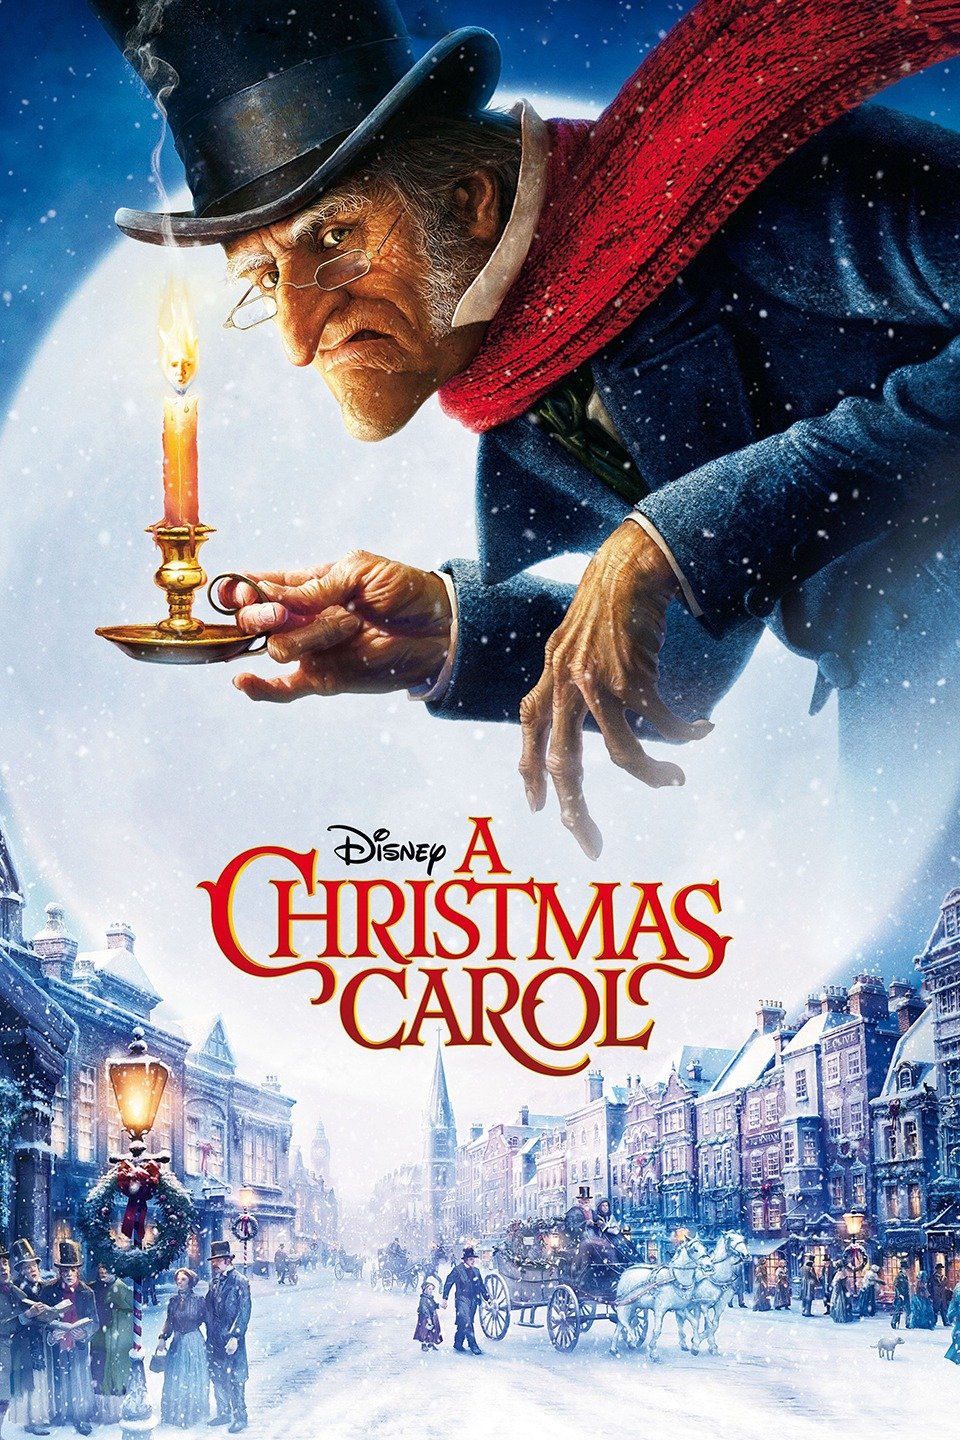 Disneys A Christmas Carol Trailer 1 Trailers And Videos Rotten Tomatoes